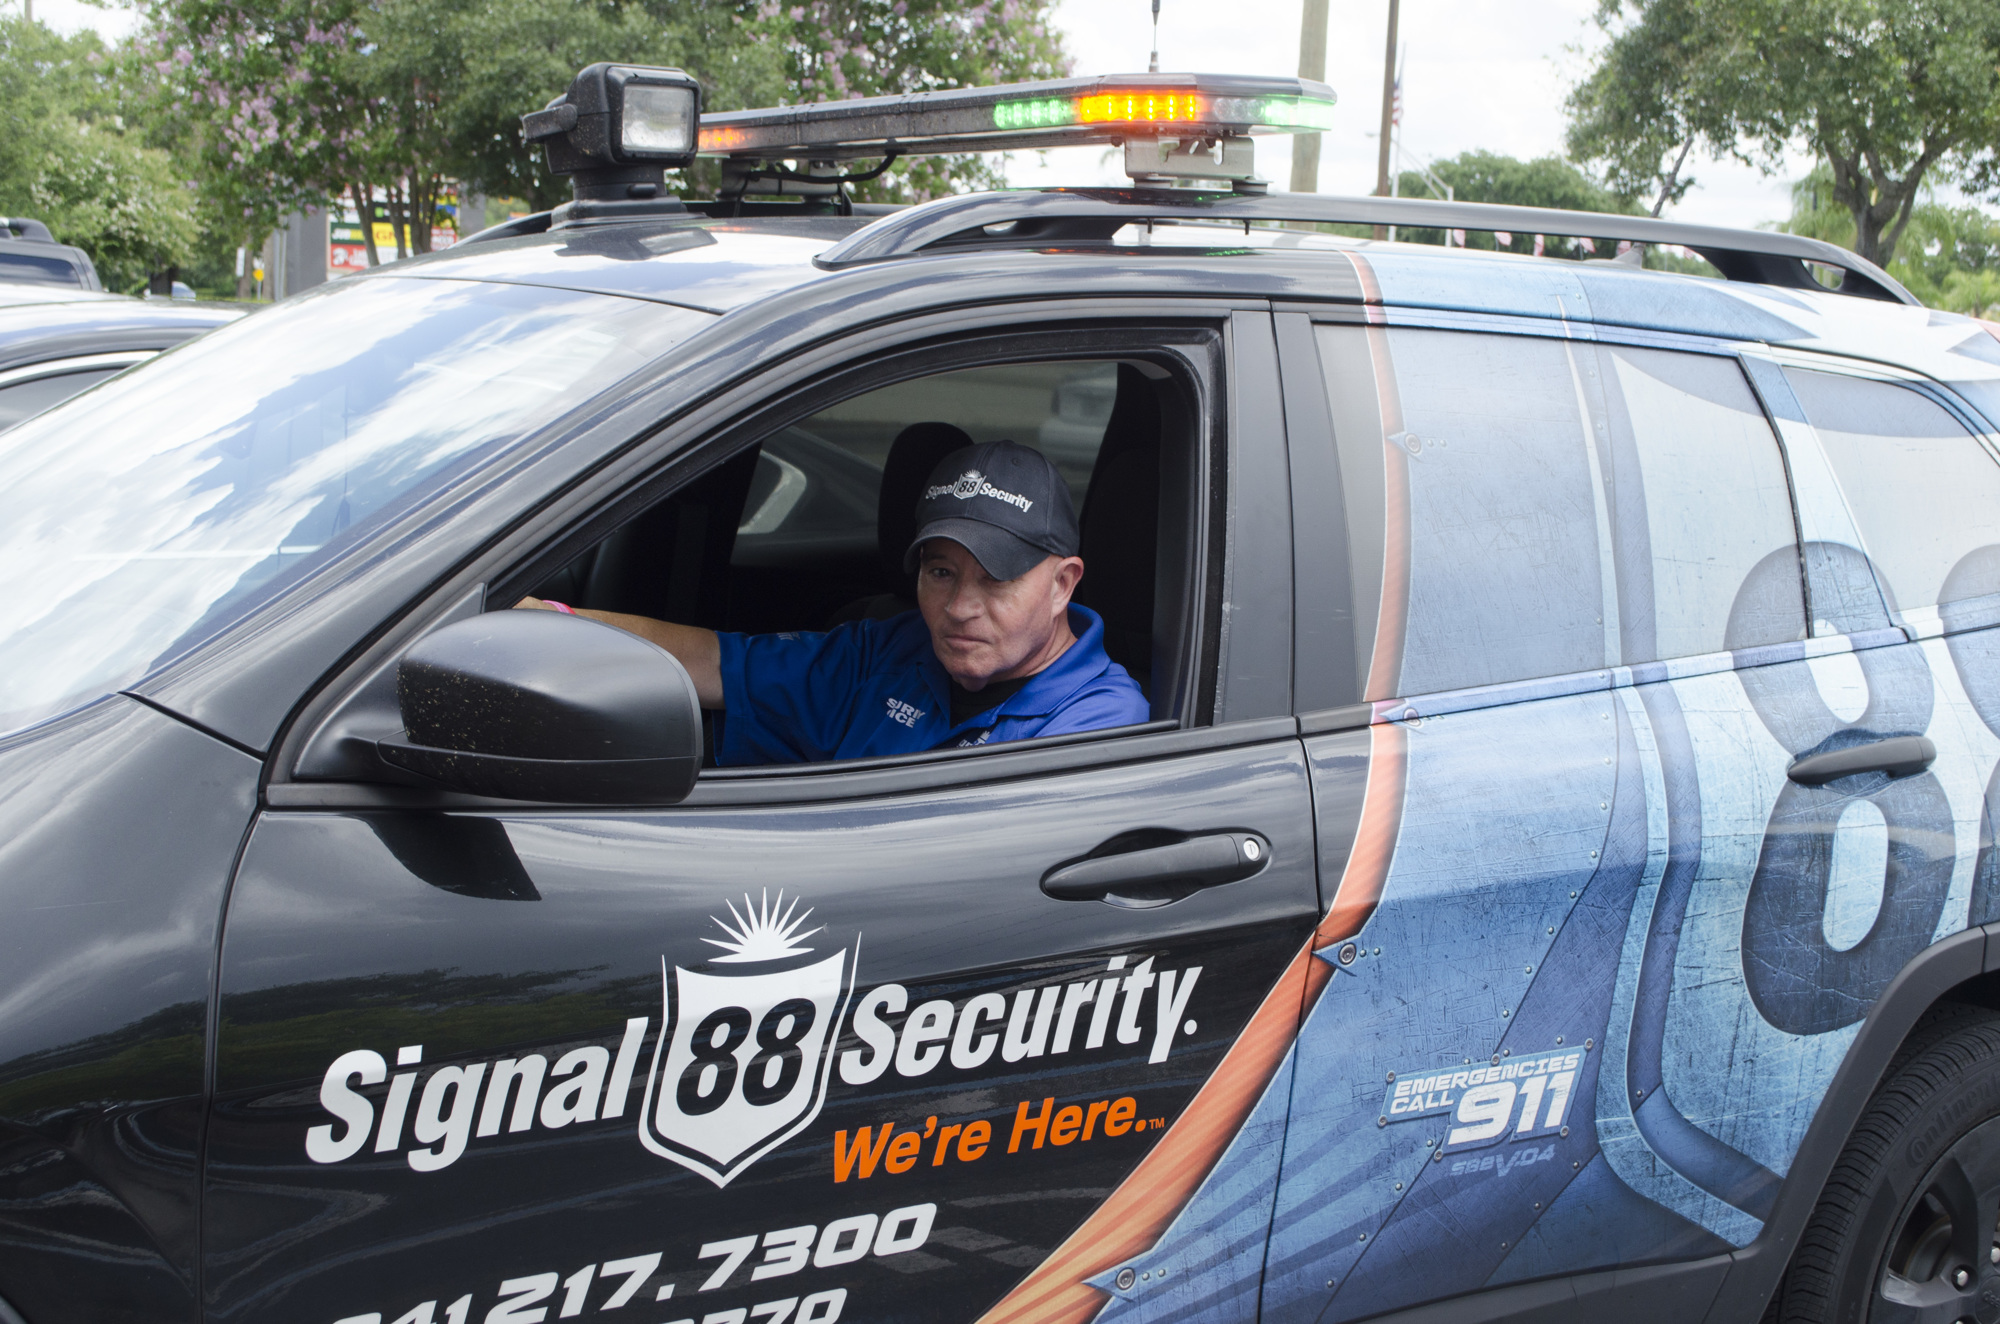 Stouffer has been working as a security officer or Signal 88 of Sarasota for more than four months now.